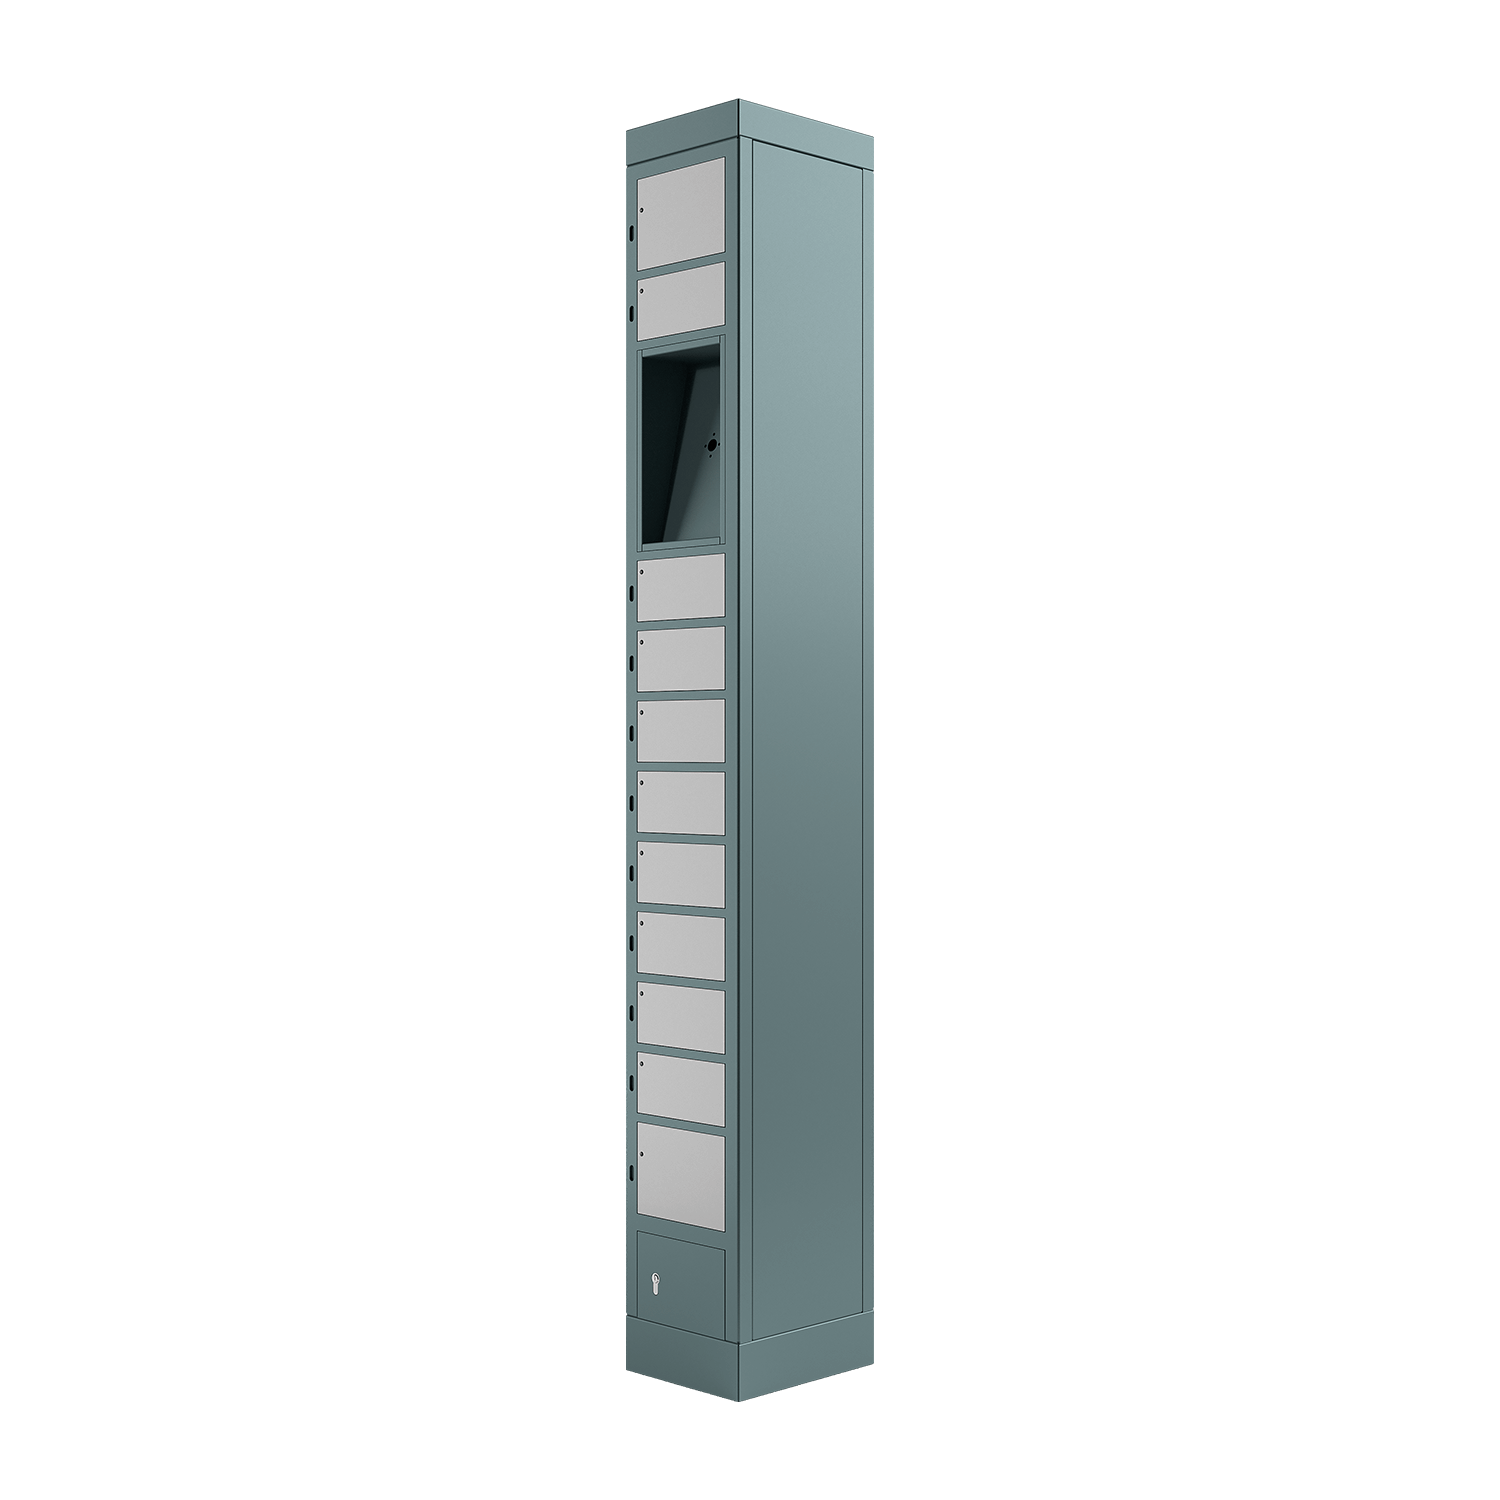 locker compartment system, size S, with 11 compartments, space for user terminal, right view